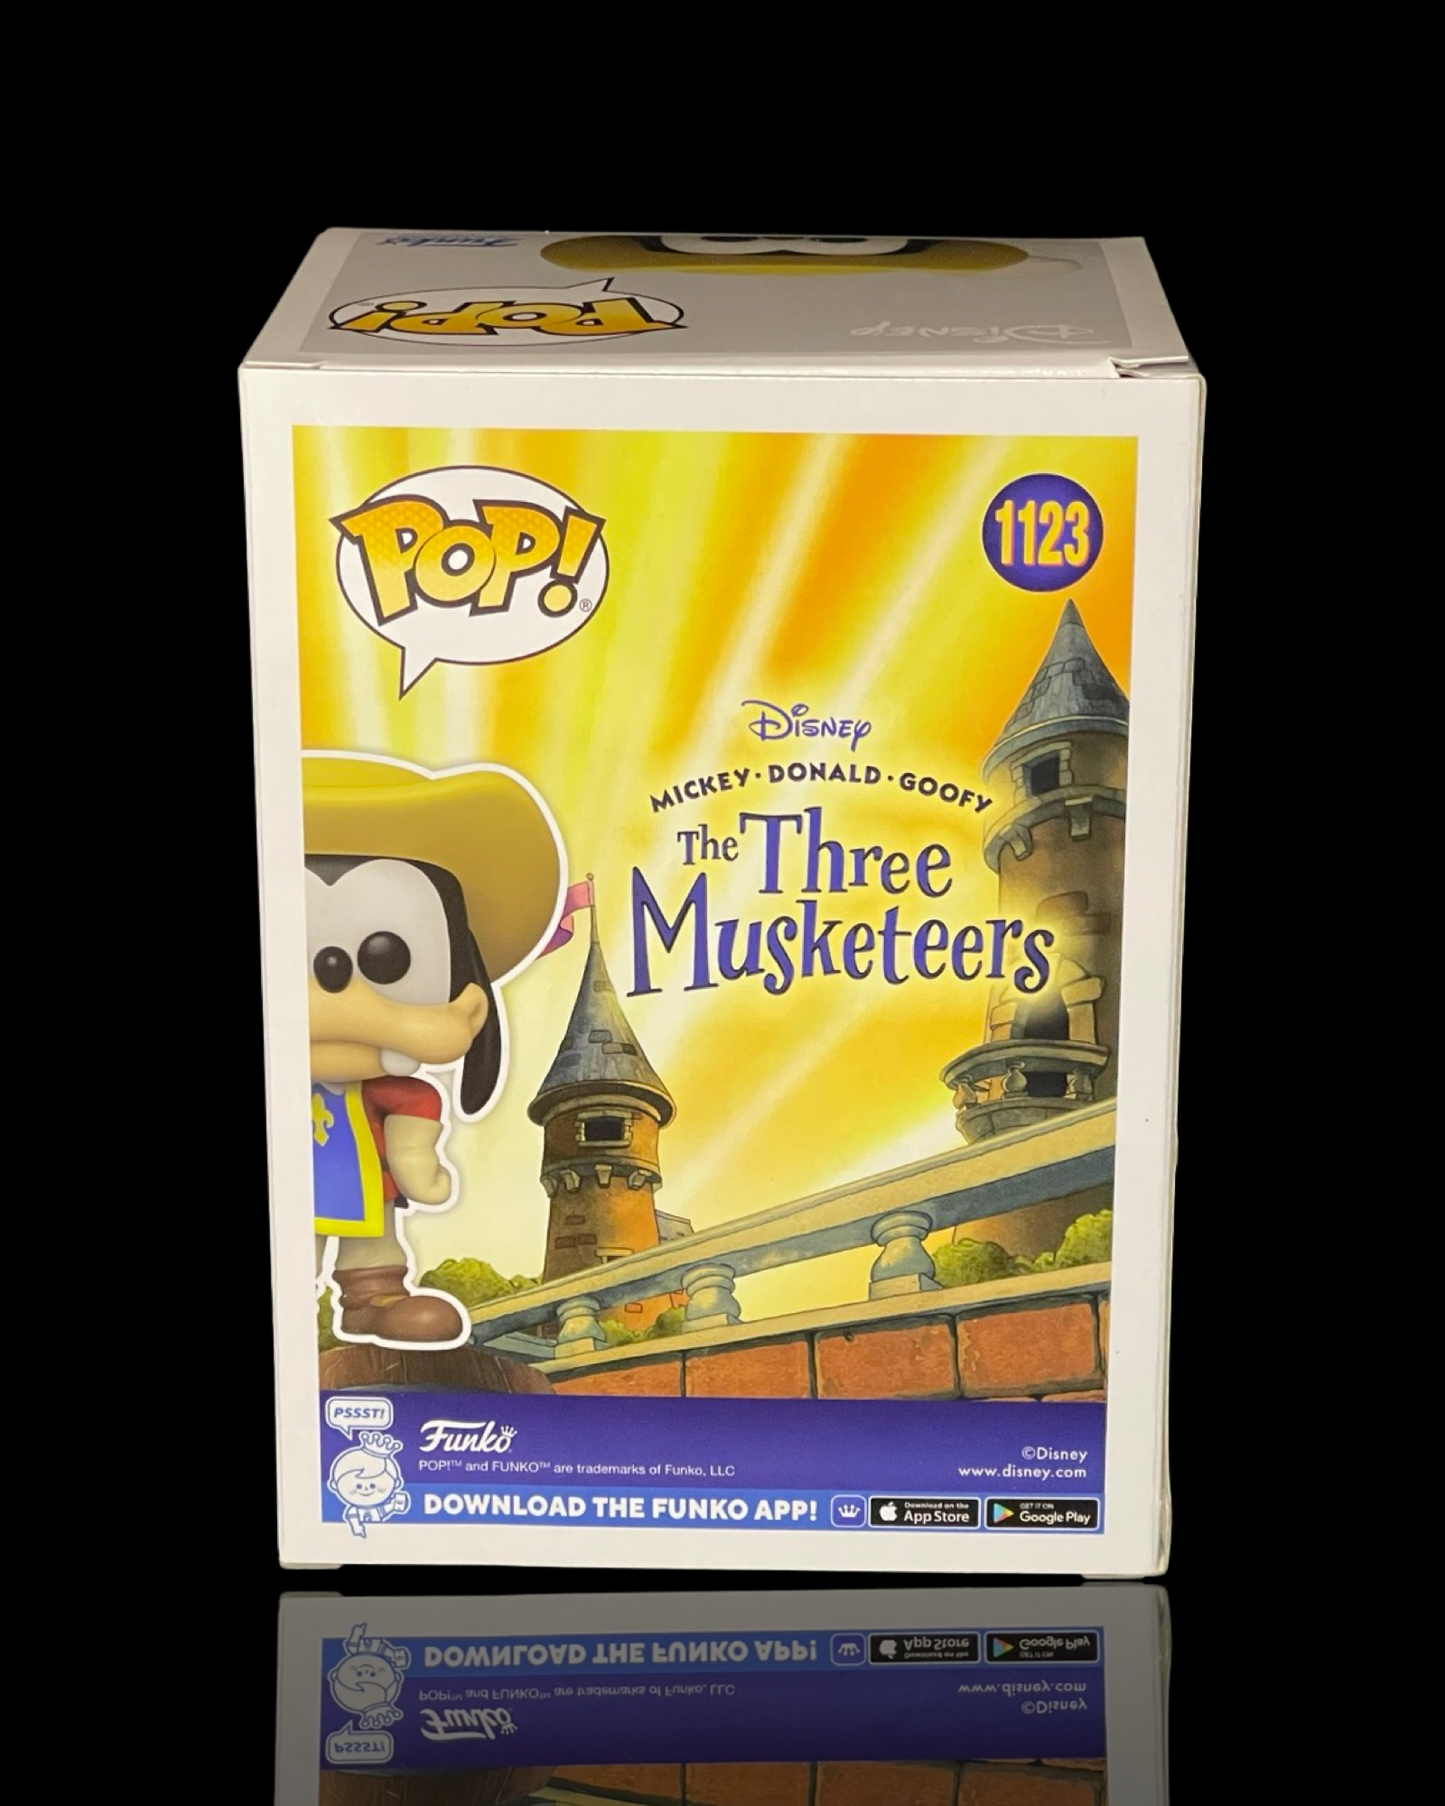 The Three Musketeers: Goofy 2021 Fall Convention Exclusive